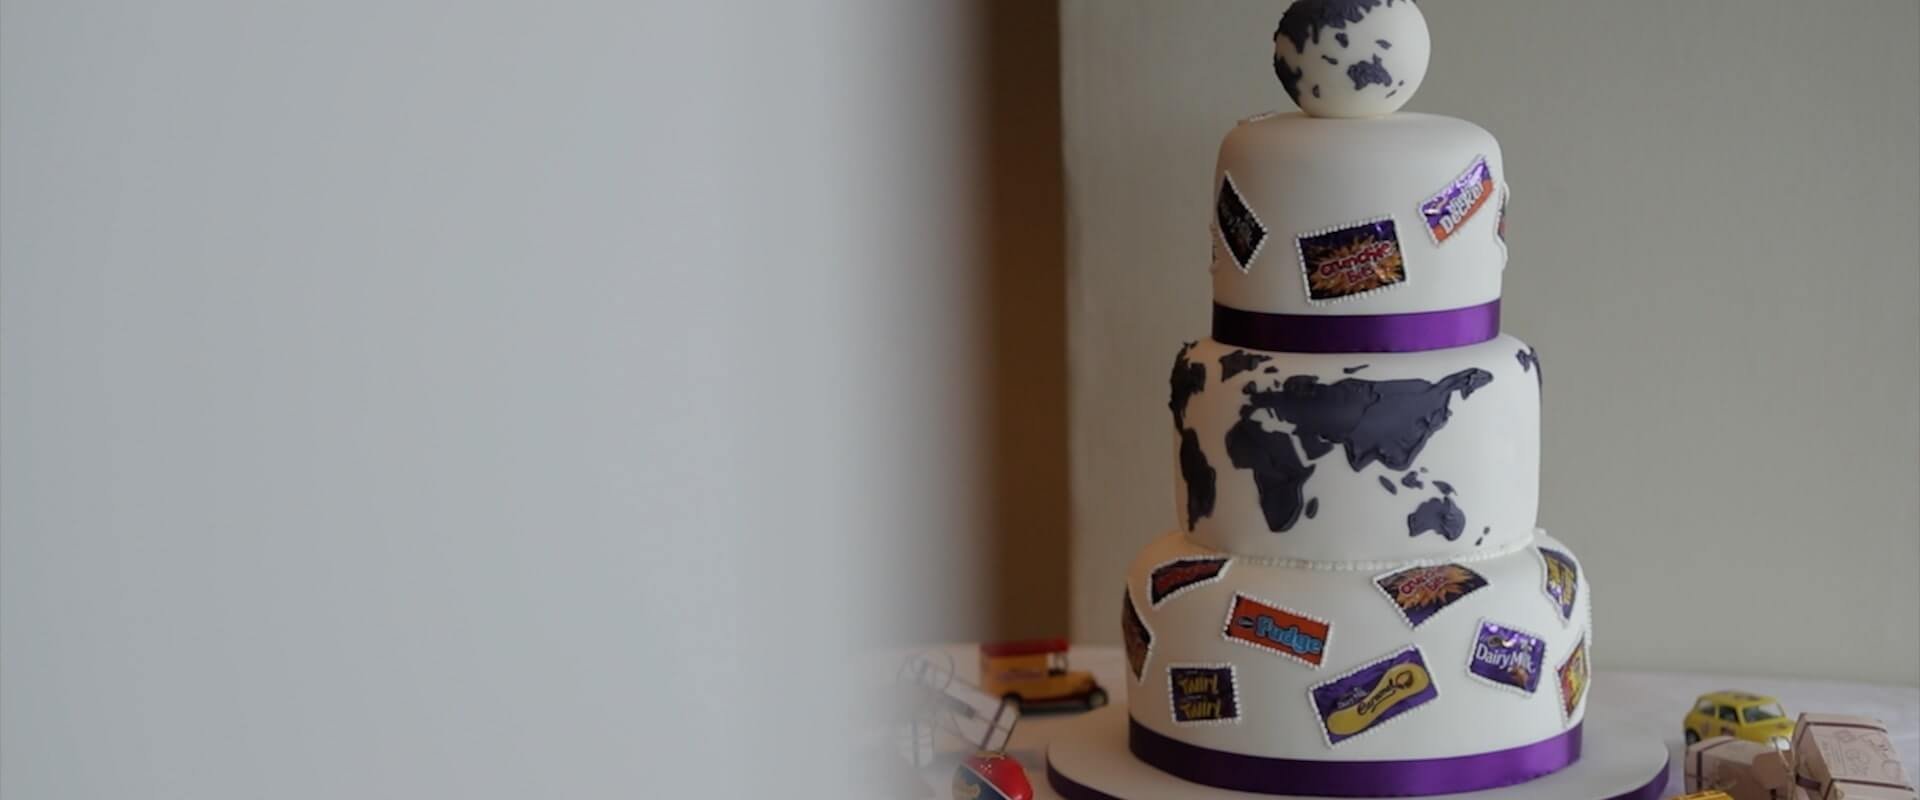 A closeup of a Cadbury's themed wedding cake, with famous cadbury's chocolate logos drawn on in icing